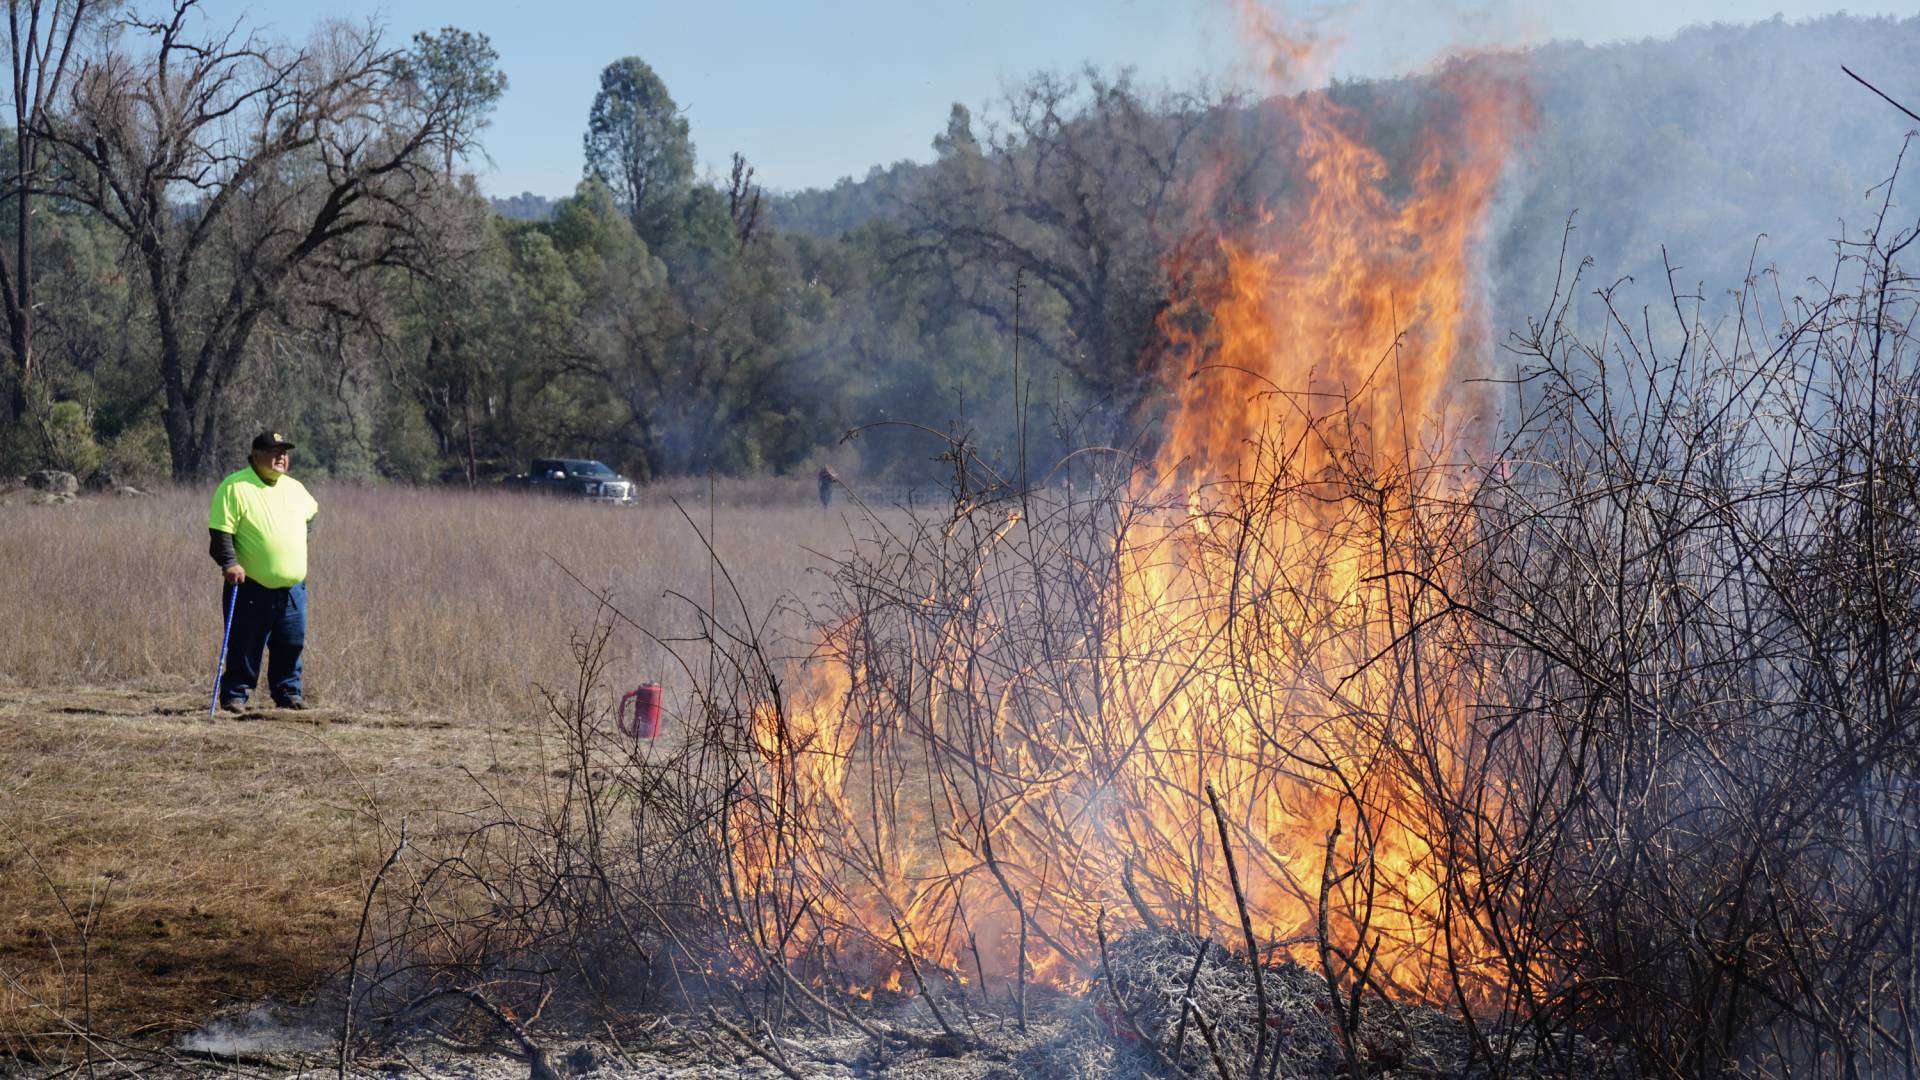 Goode looks on as sourberry bushes burn. After the bushes are burned in the winter, they sprout again in the spring. Lauren Sommer/NPR